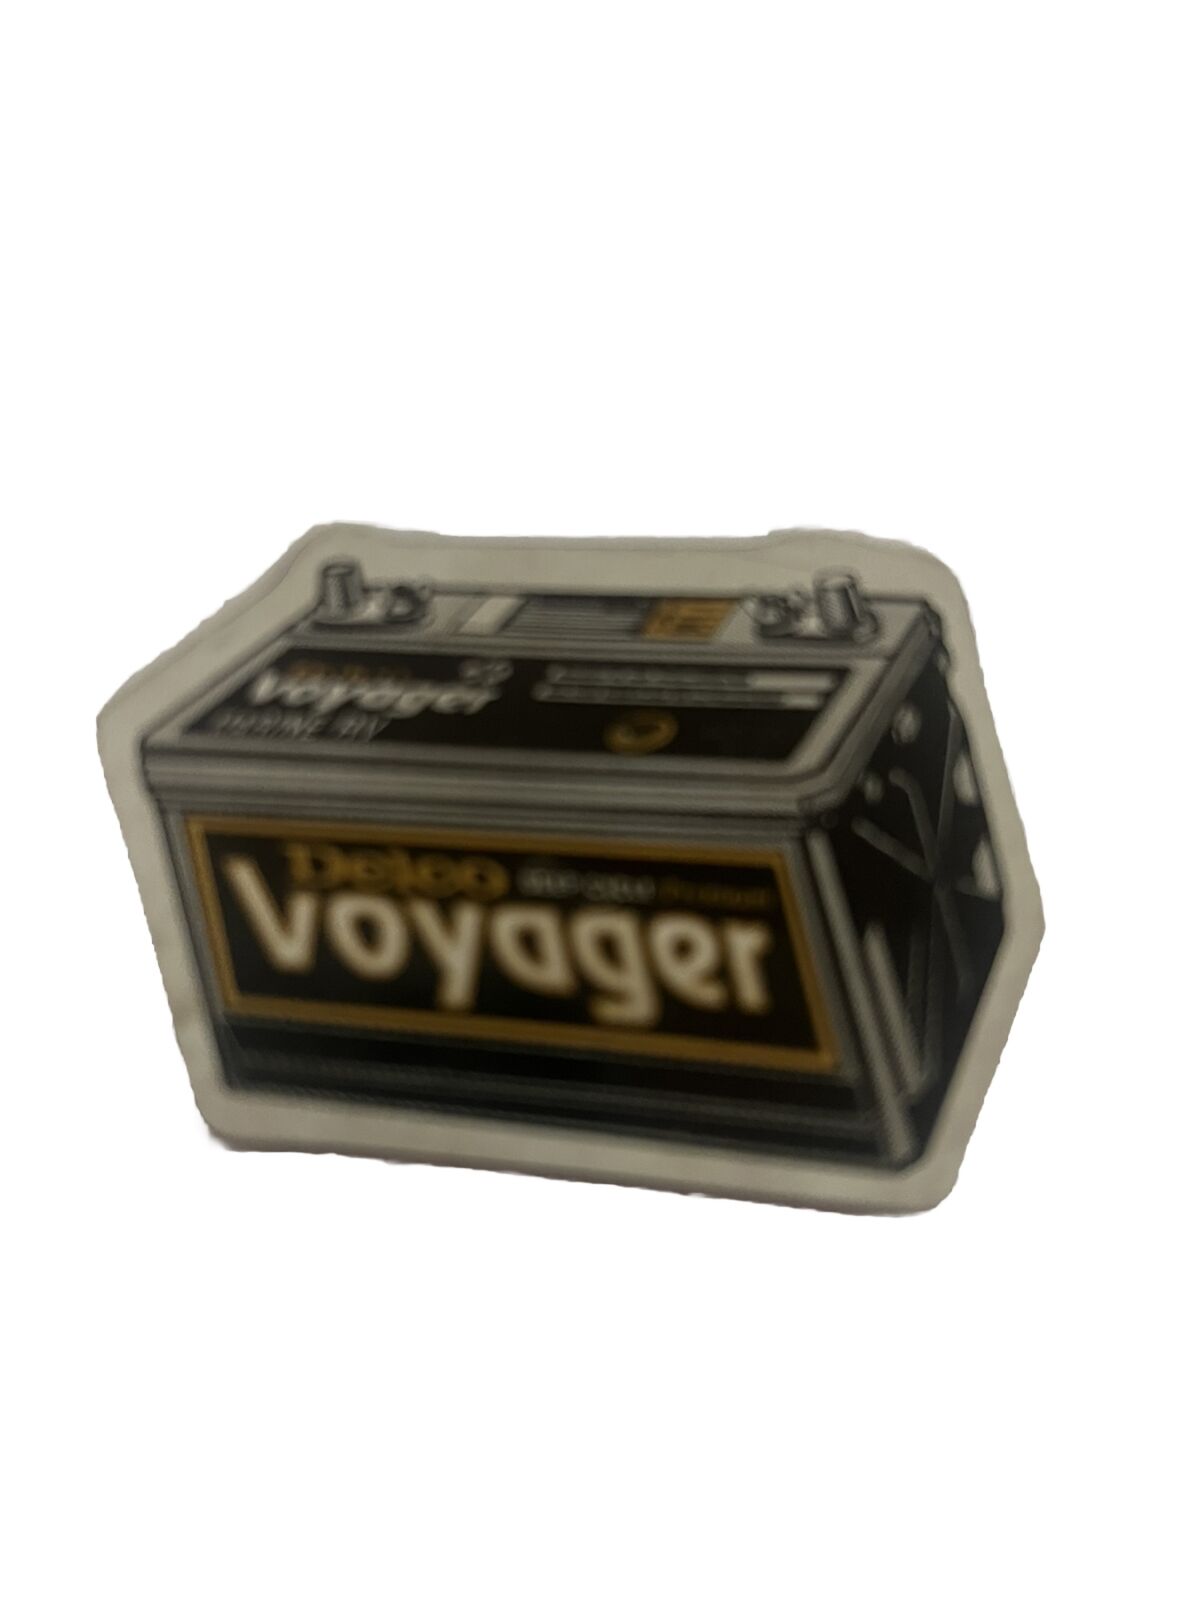 Delco Voyager Battery Magnet